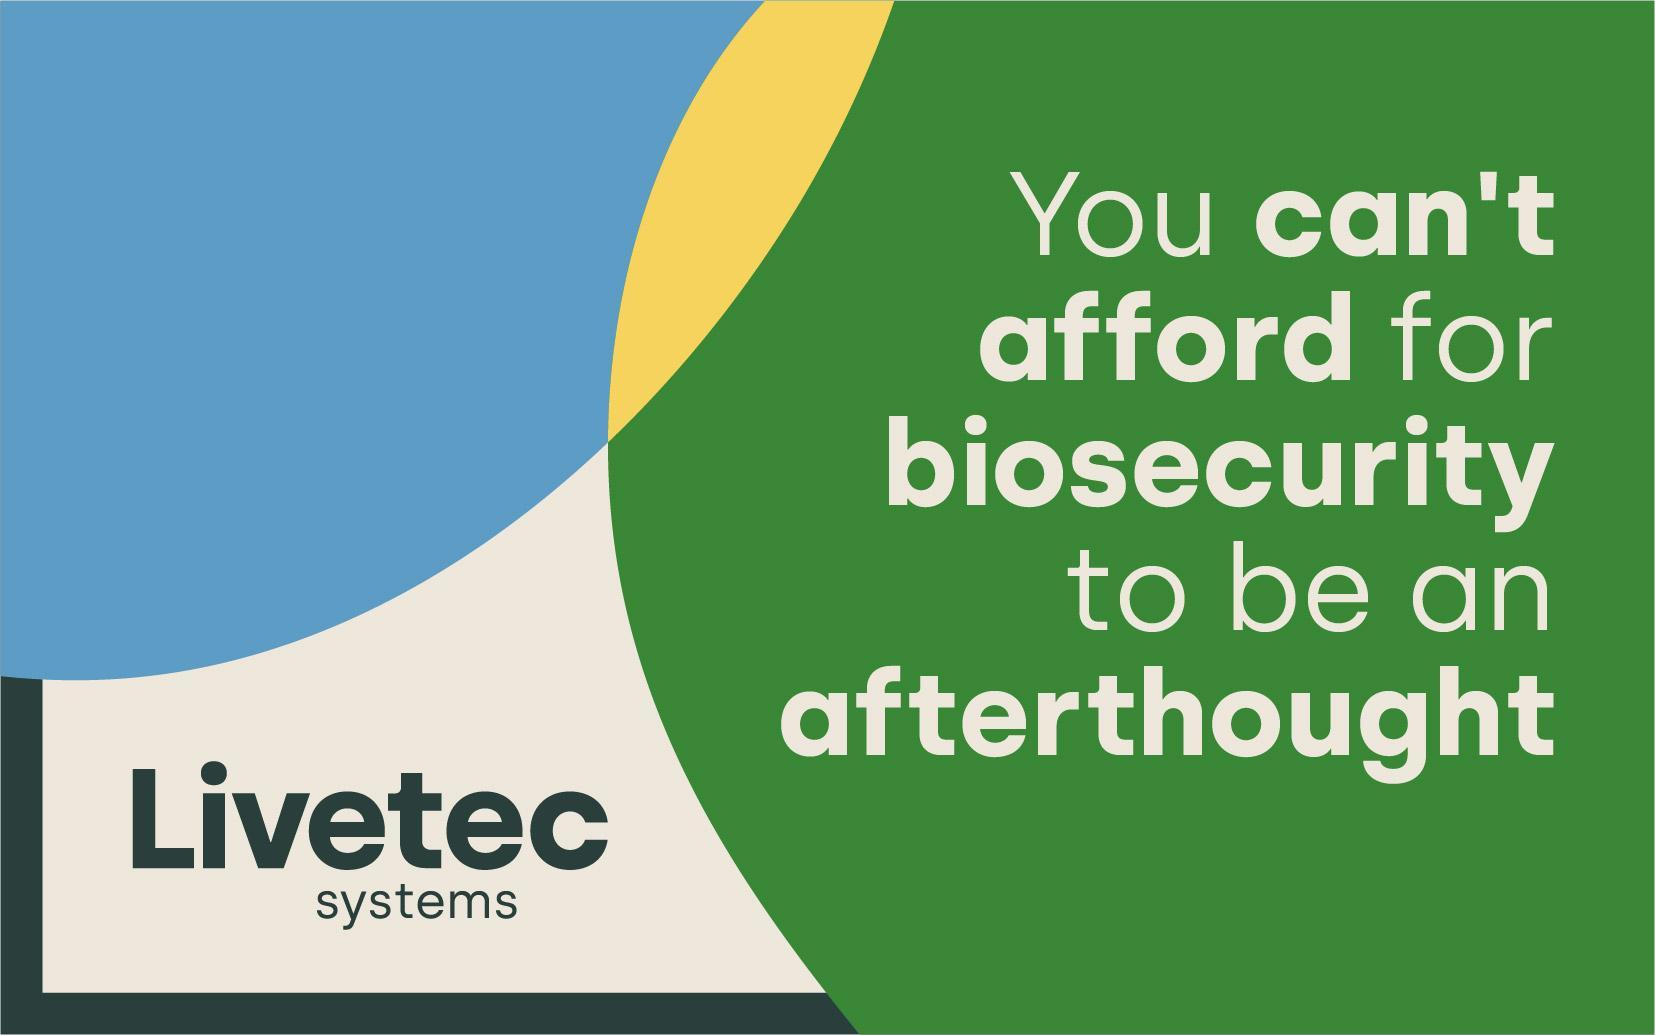 You can’t afford for biosecurity to be an afterthought